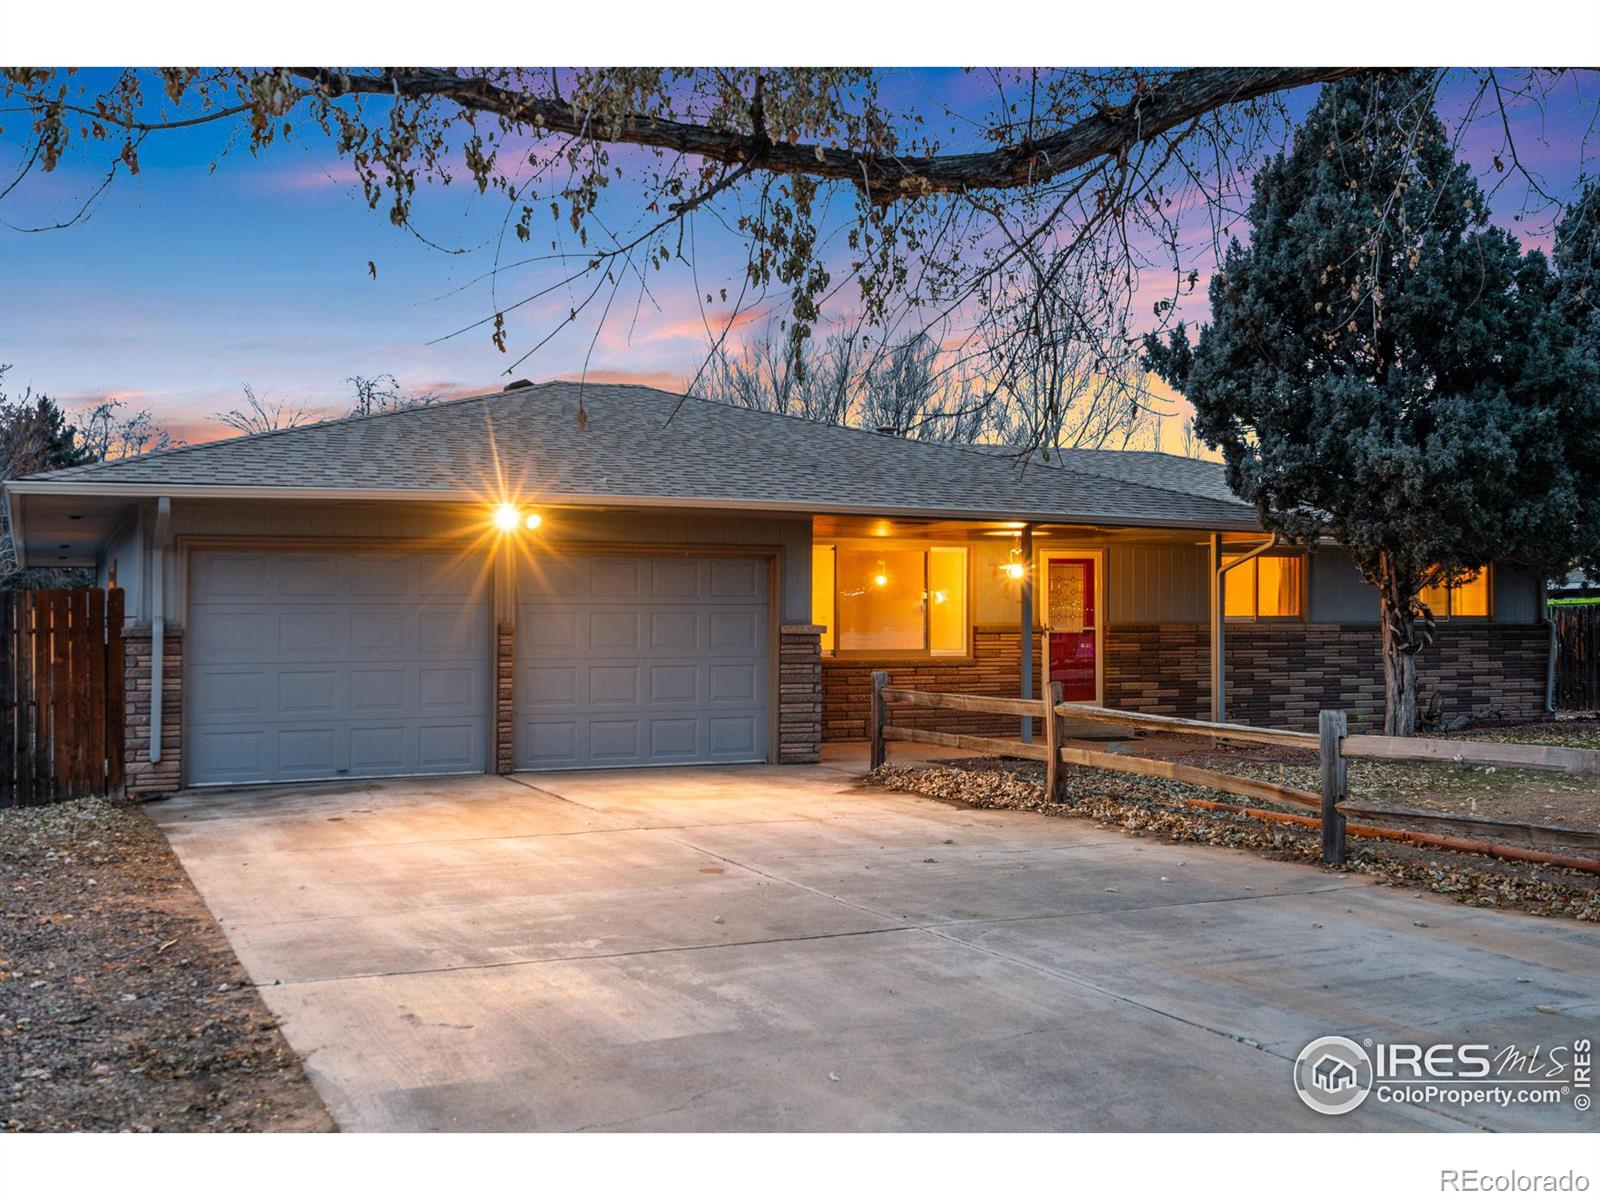 717  greenbriar drive, Fort Collins sold home. Closed on 2024-02-16 for $517,000.